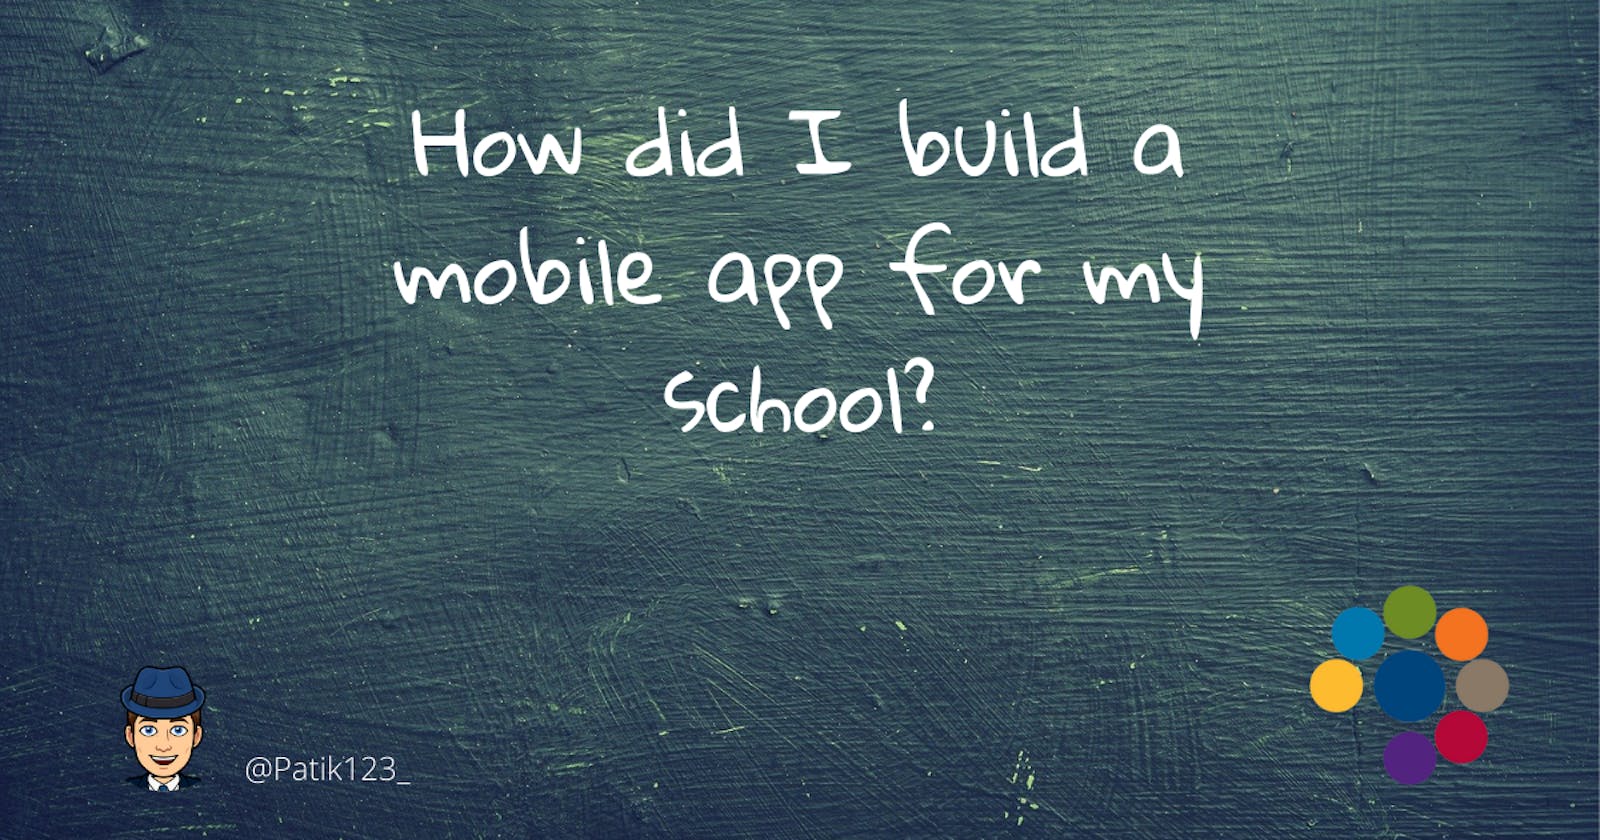 How did I build a mobile app for my school?